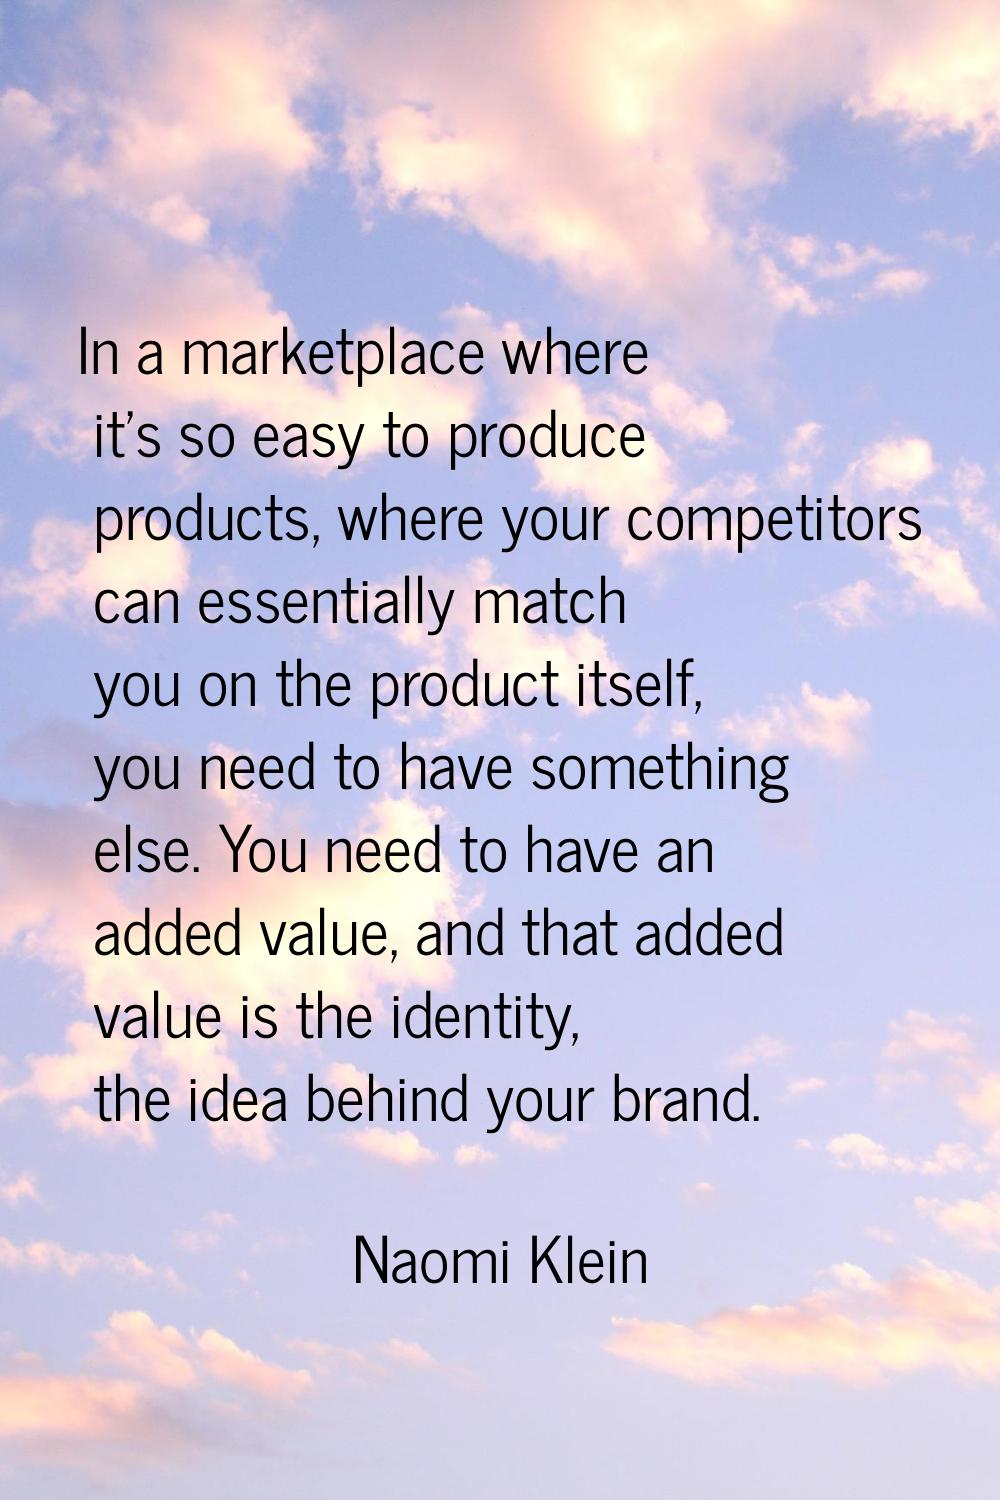 In a marketplace where it's so easy to produce products, where your competitors can essentially mat